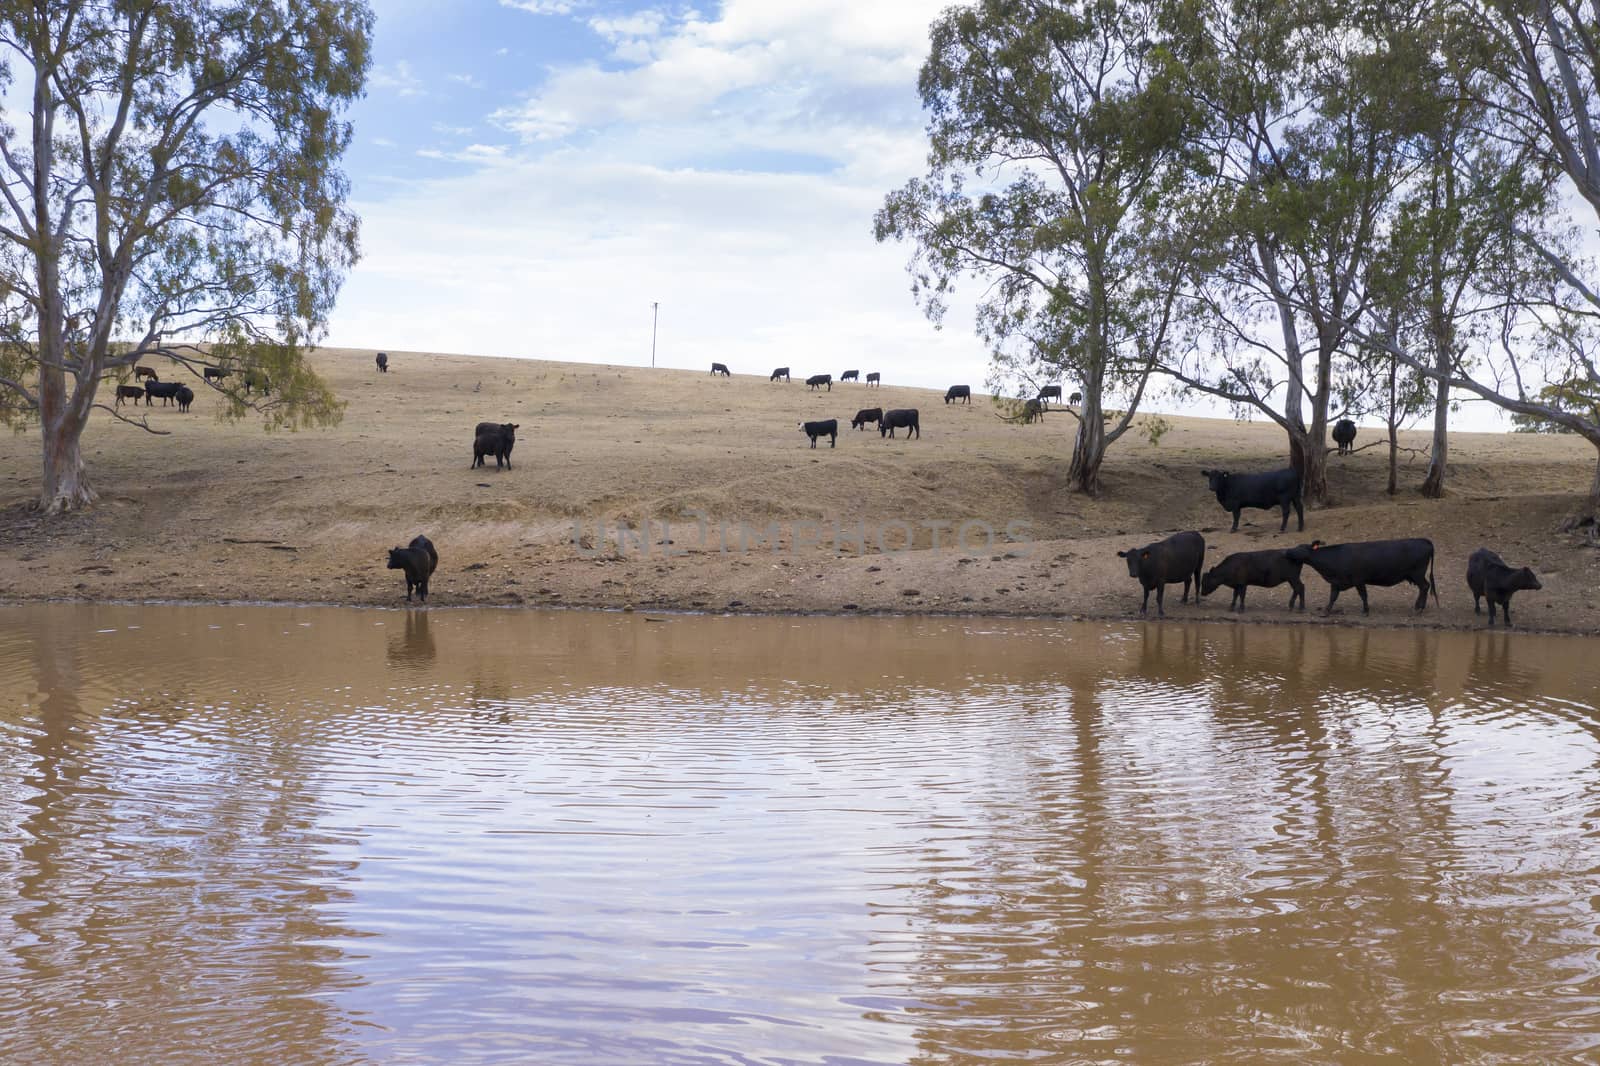 Cows drinking from an irrigation dam on a farm in Australia by WittkePhotos